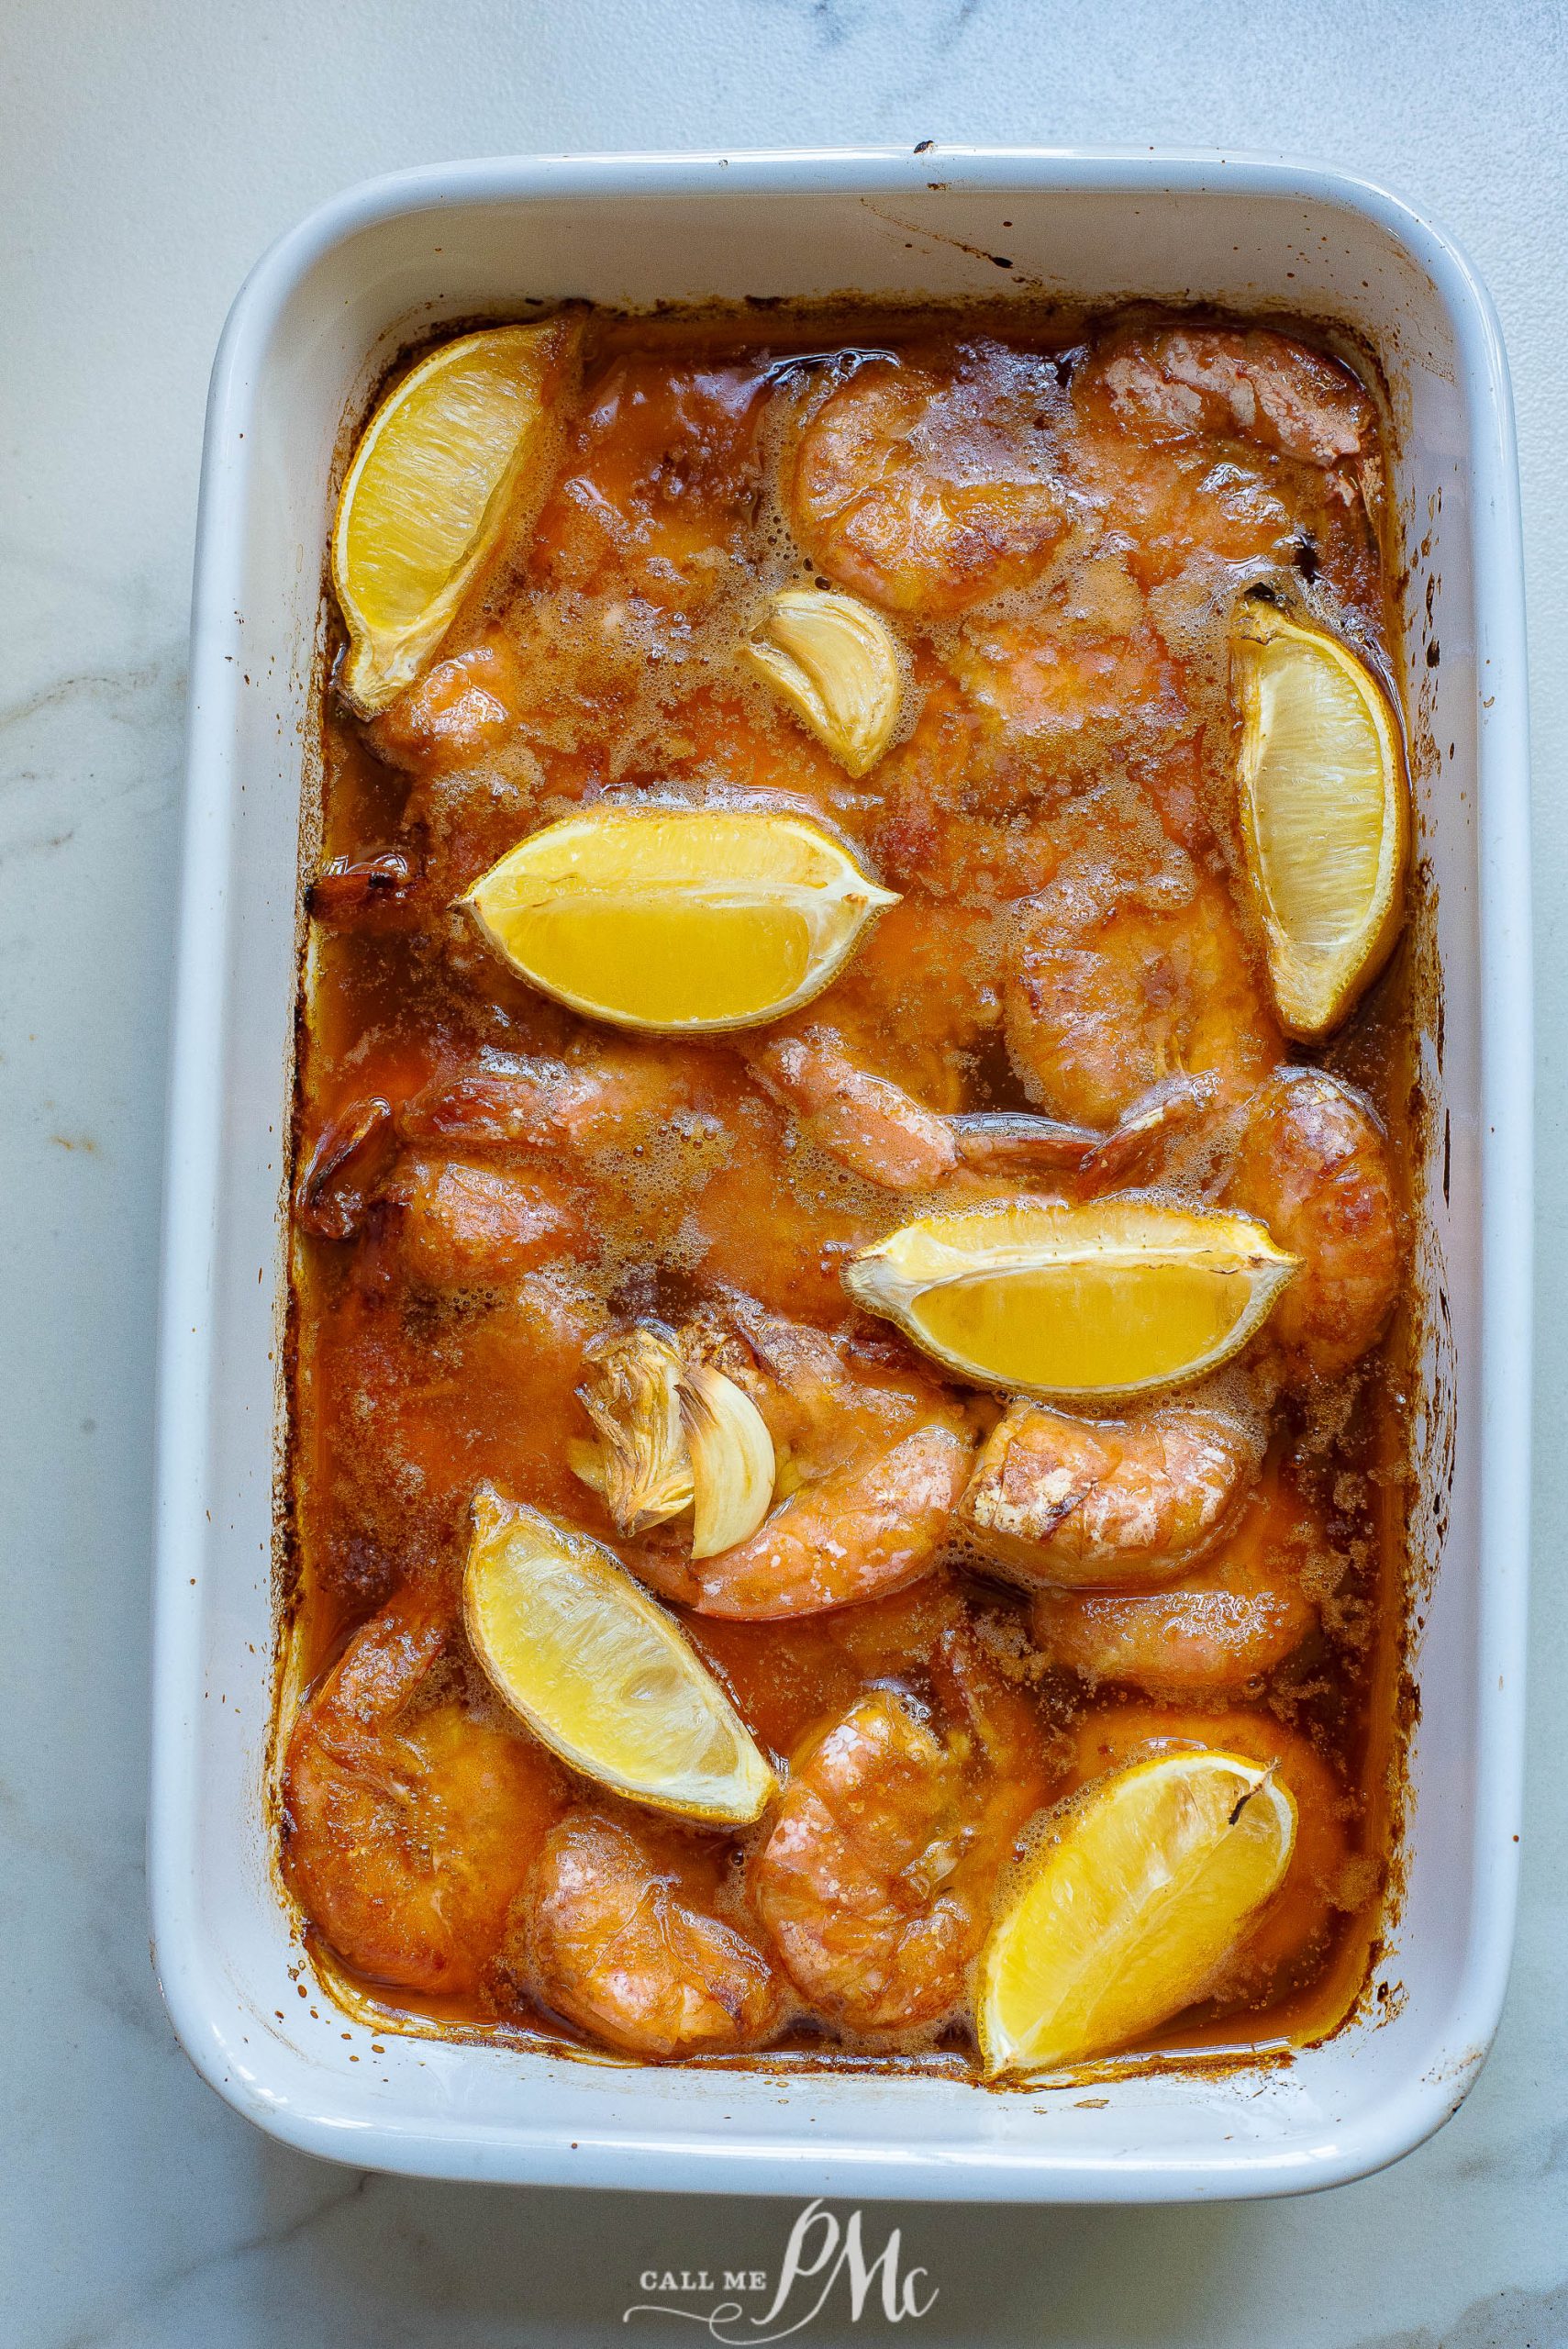 Shrimp in red sauce with lemon wedges in a casserole dish.